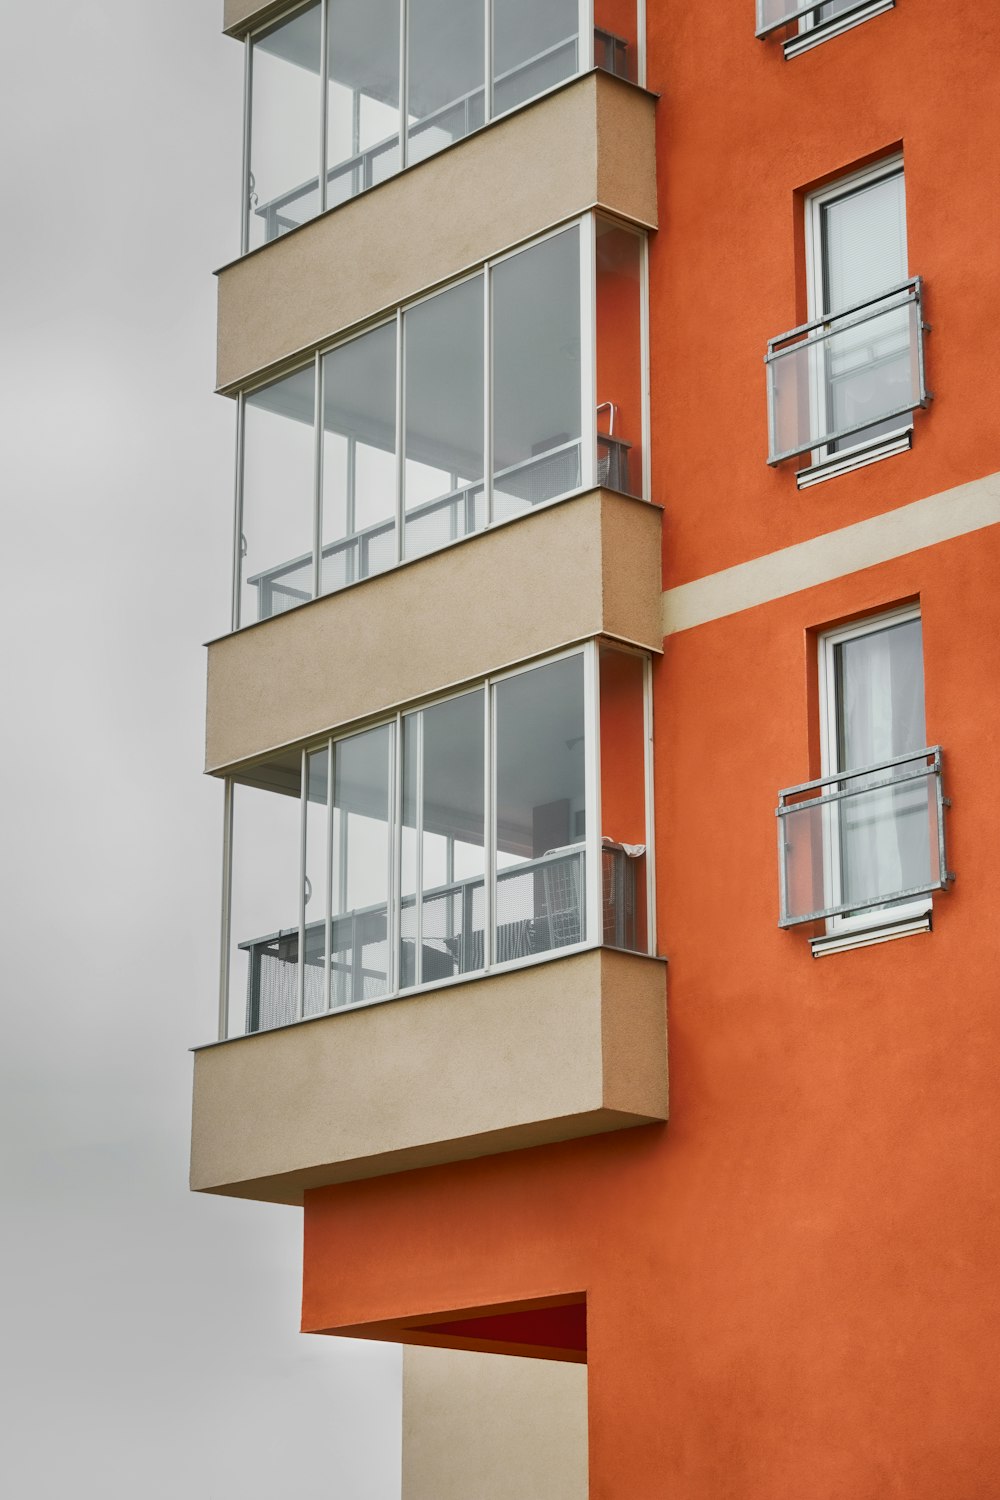 a tall orange building with balconies and windows